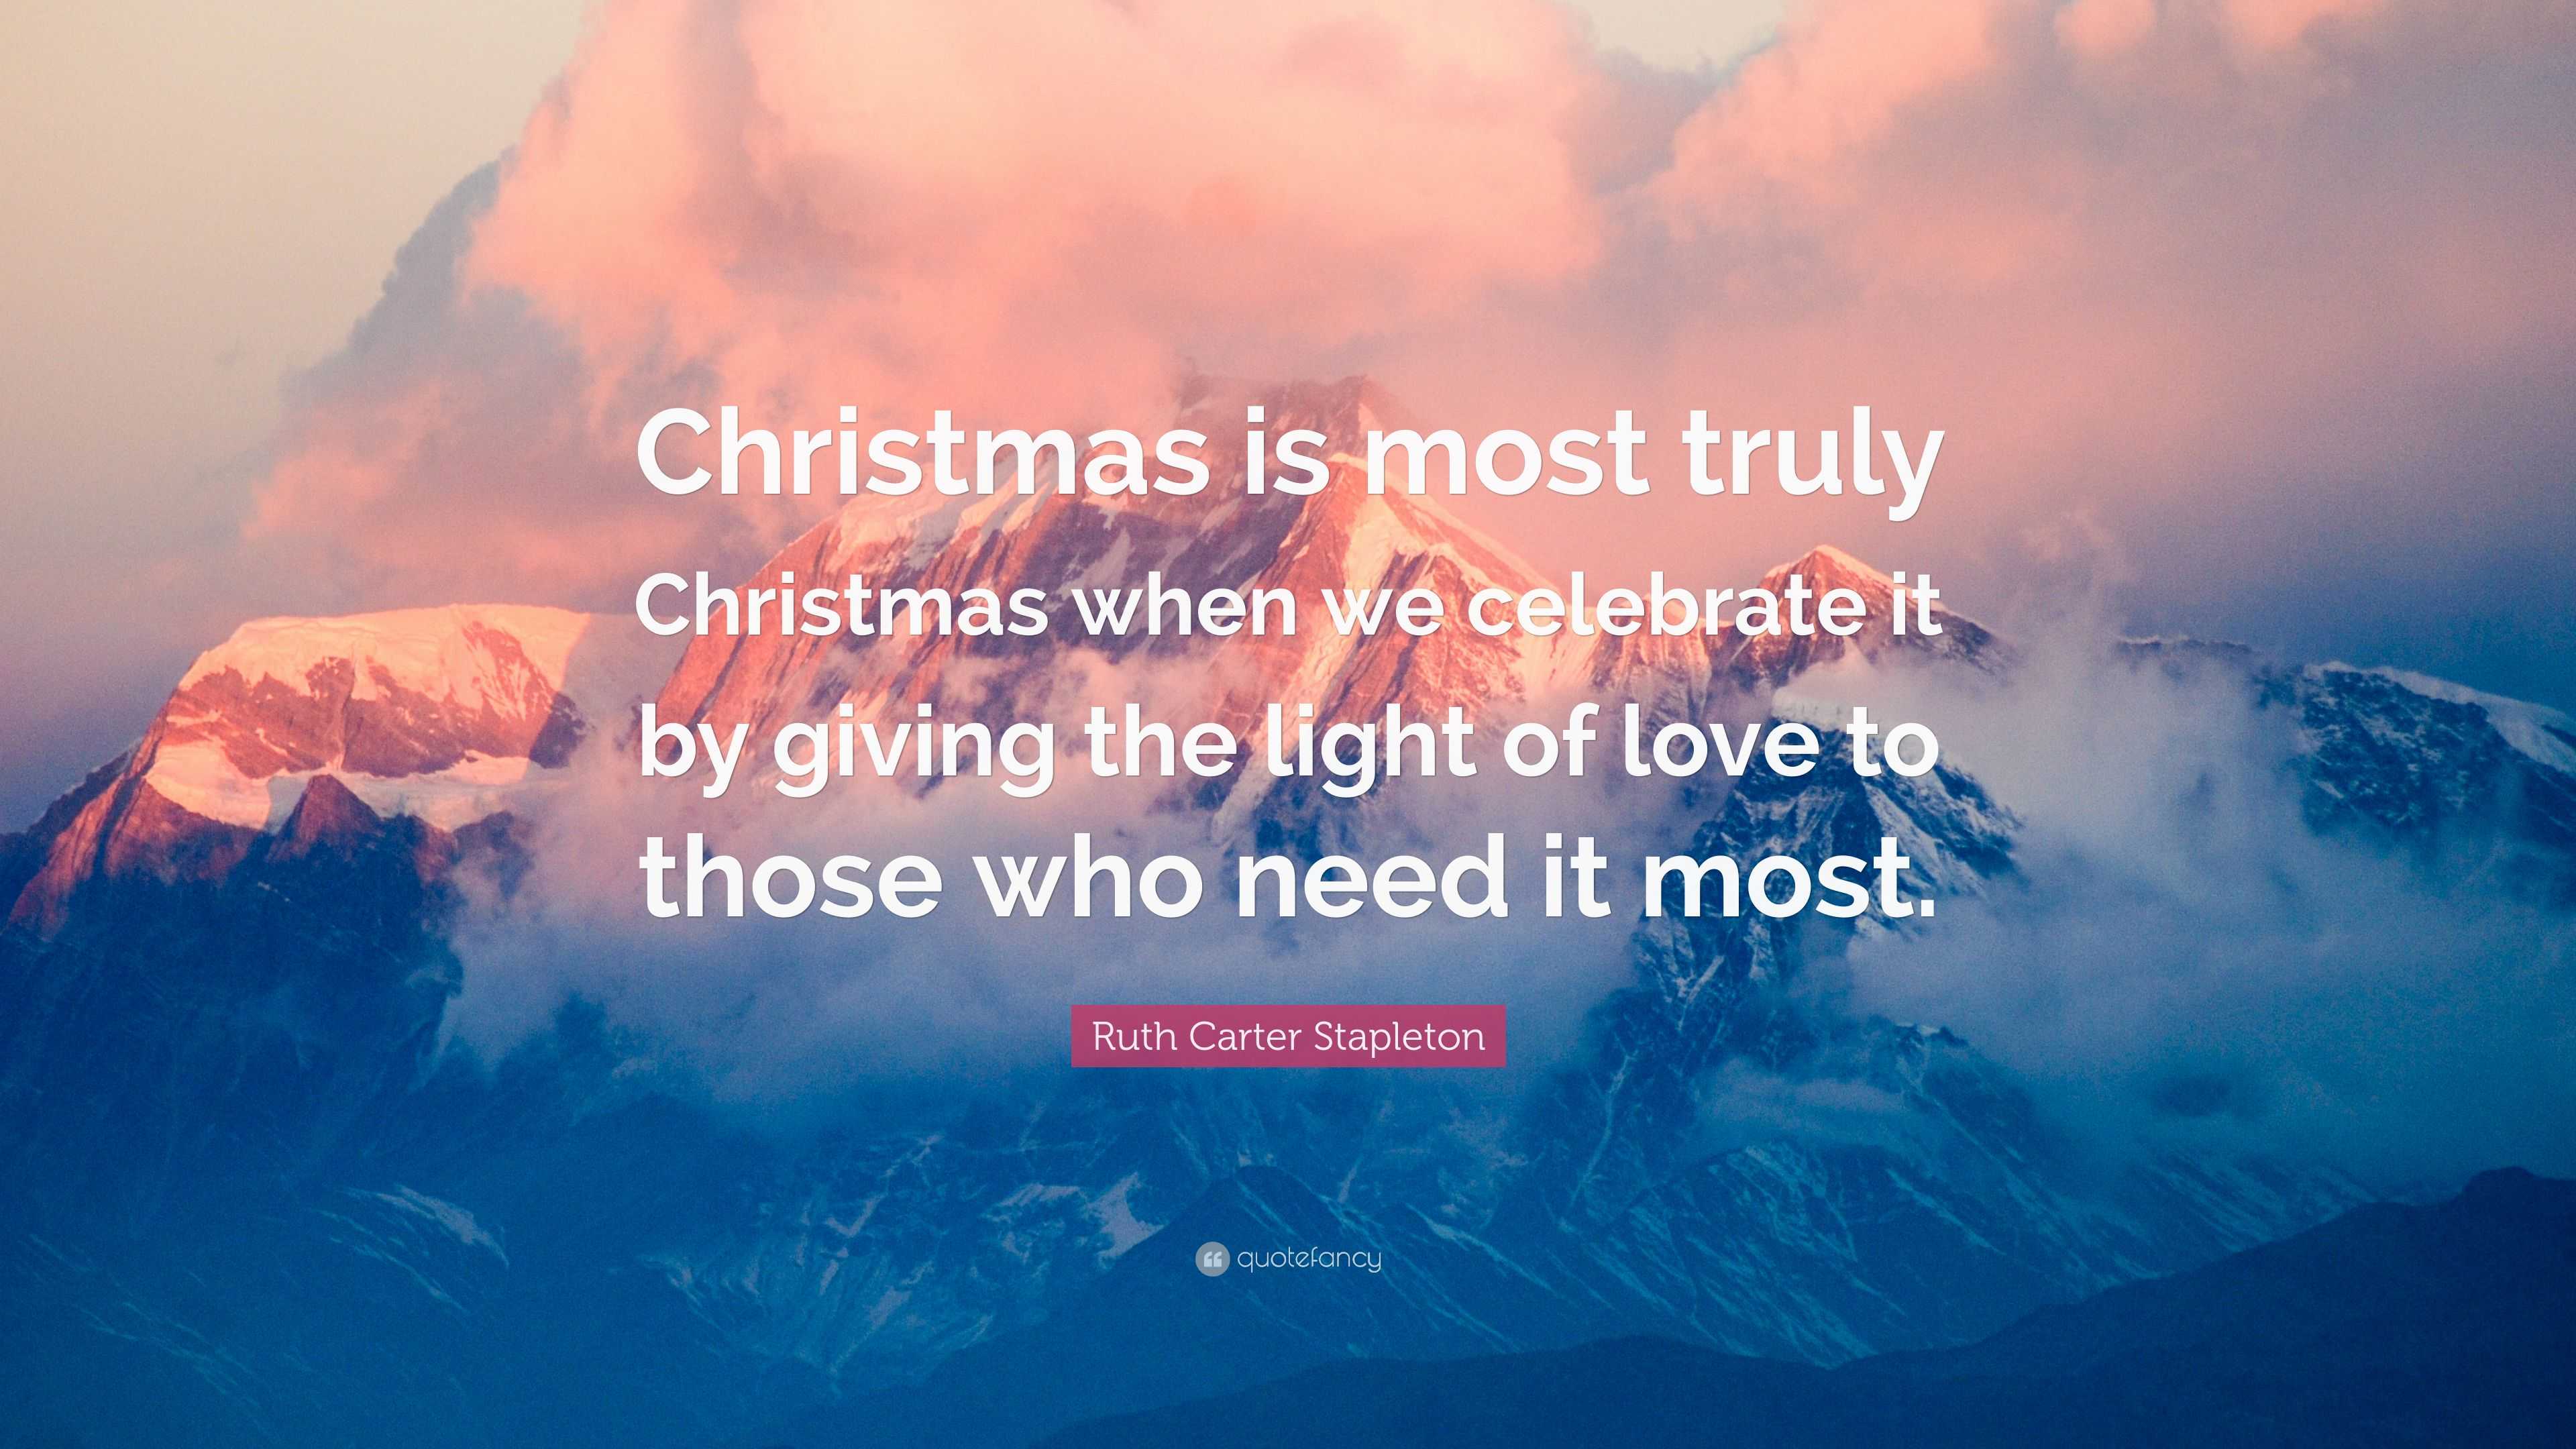 Ruth Carter Stapleton Quote: “Christmas is most truly Christmas when we ...